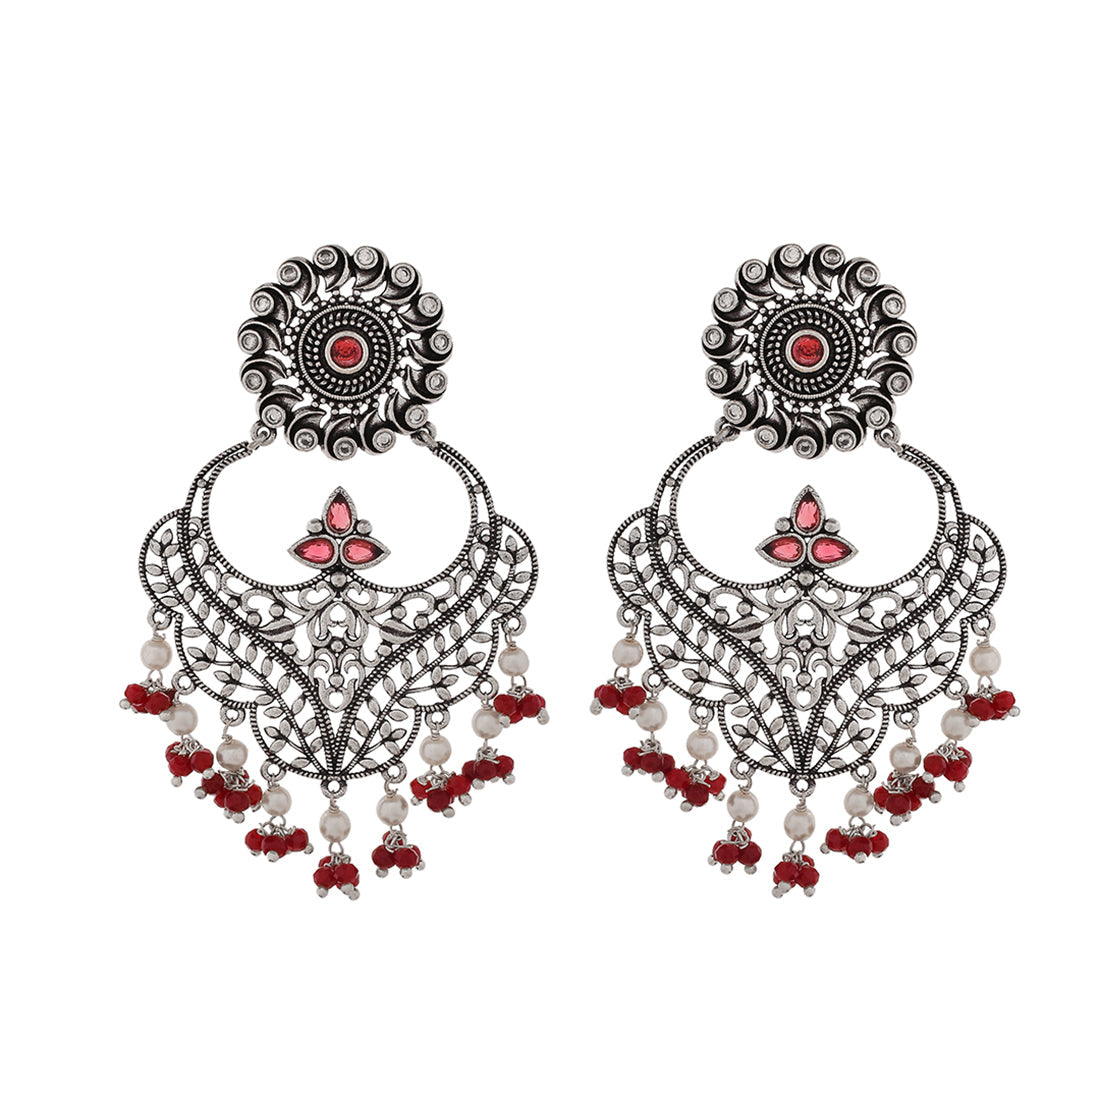 Women's Abharan Round Cut Red And White Stones And Pearls Ethnic Earrings - Voylla